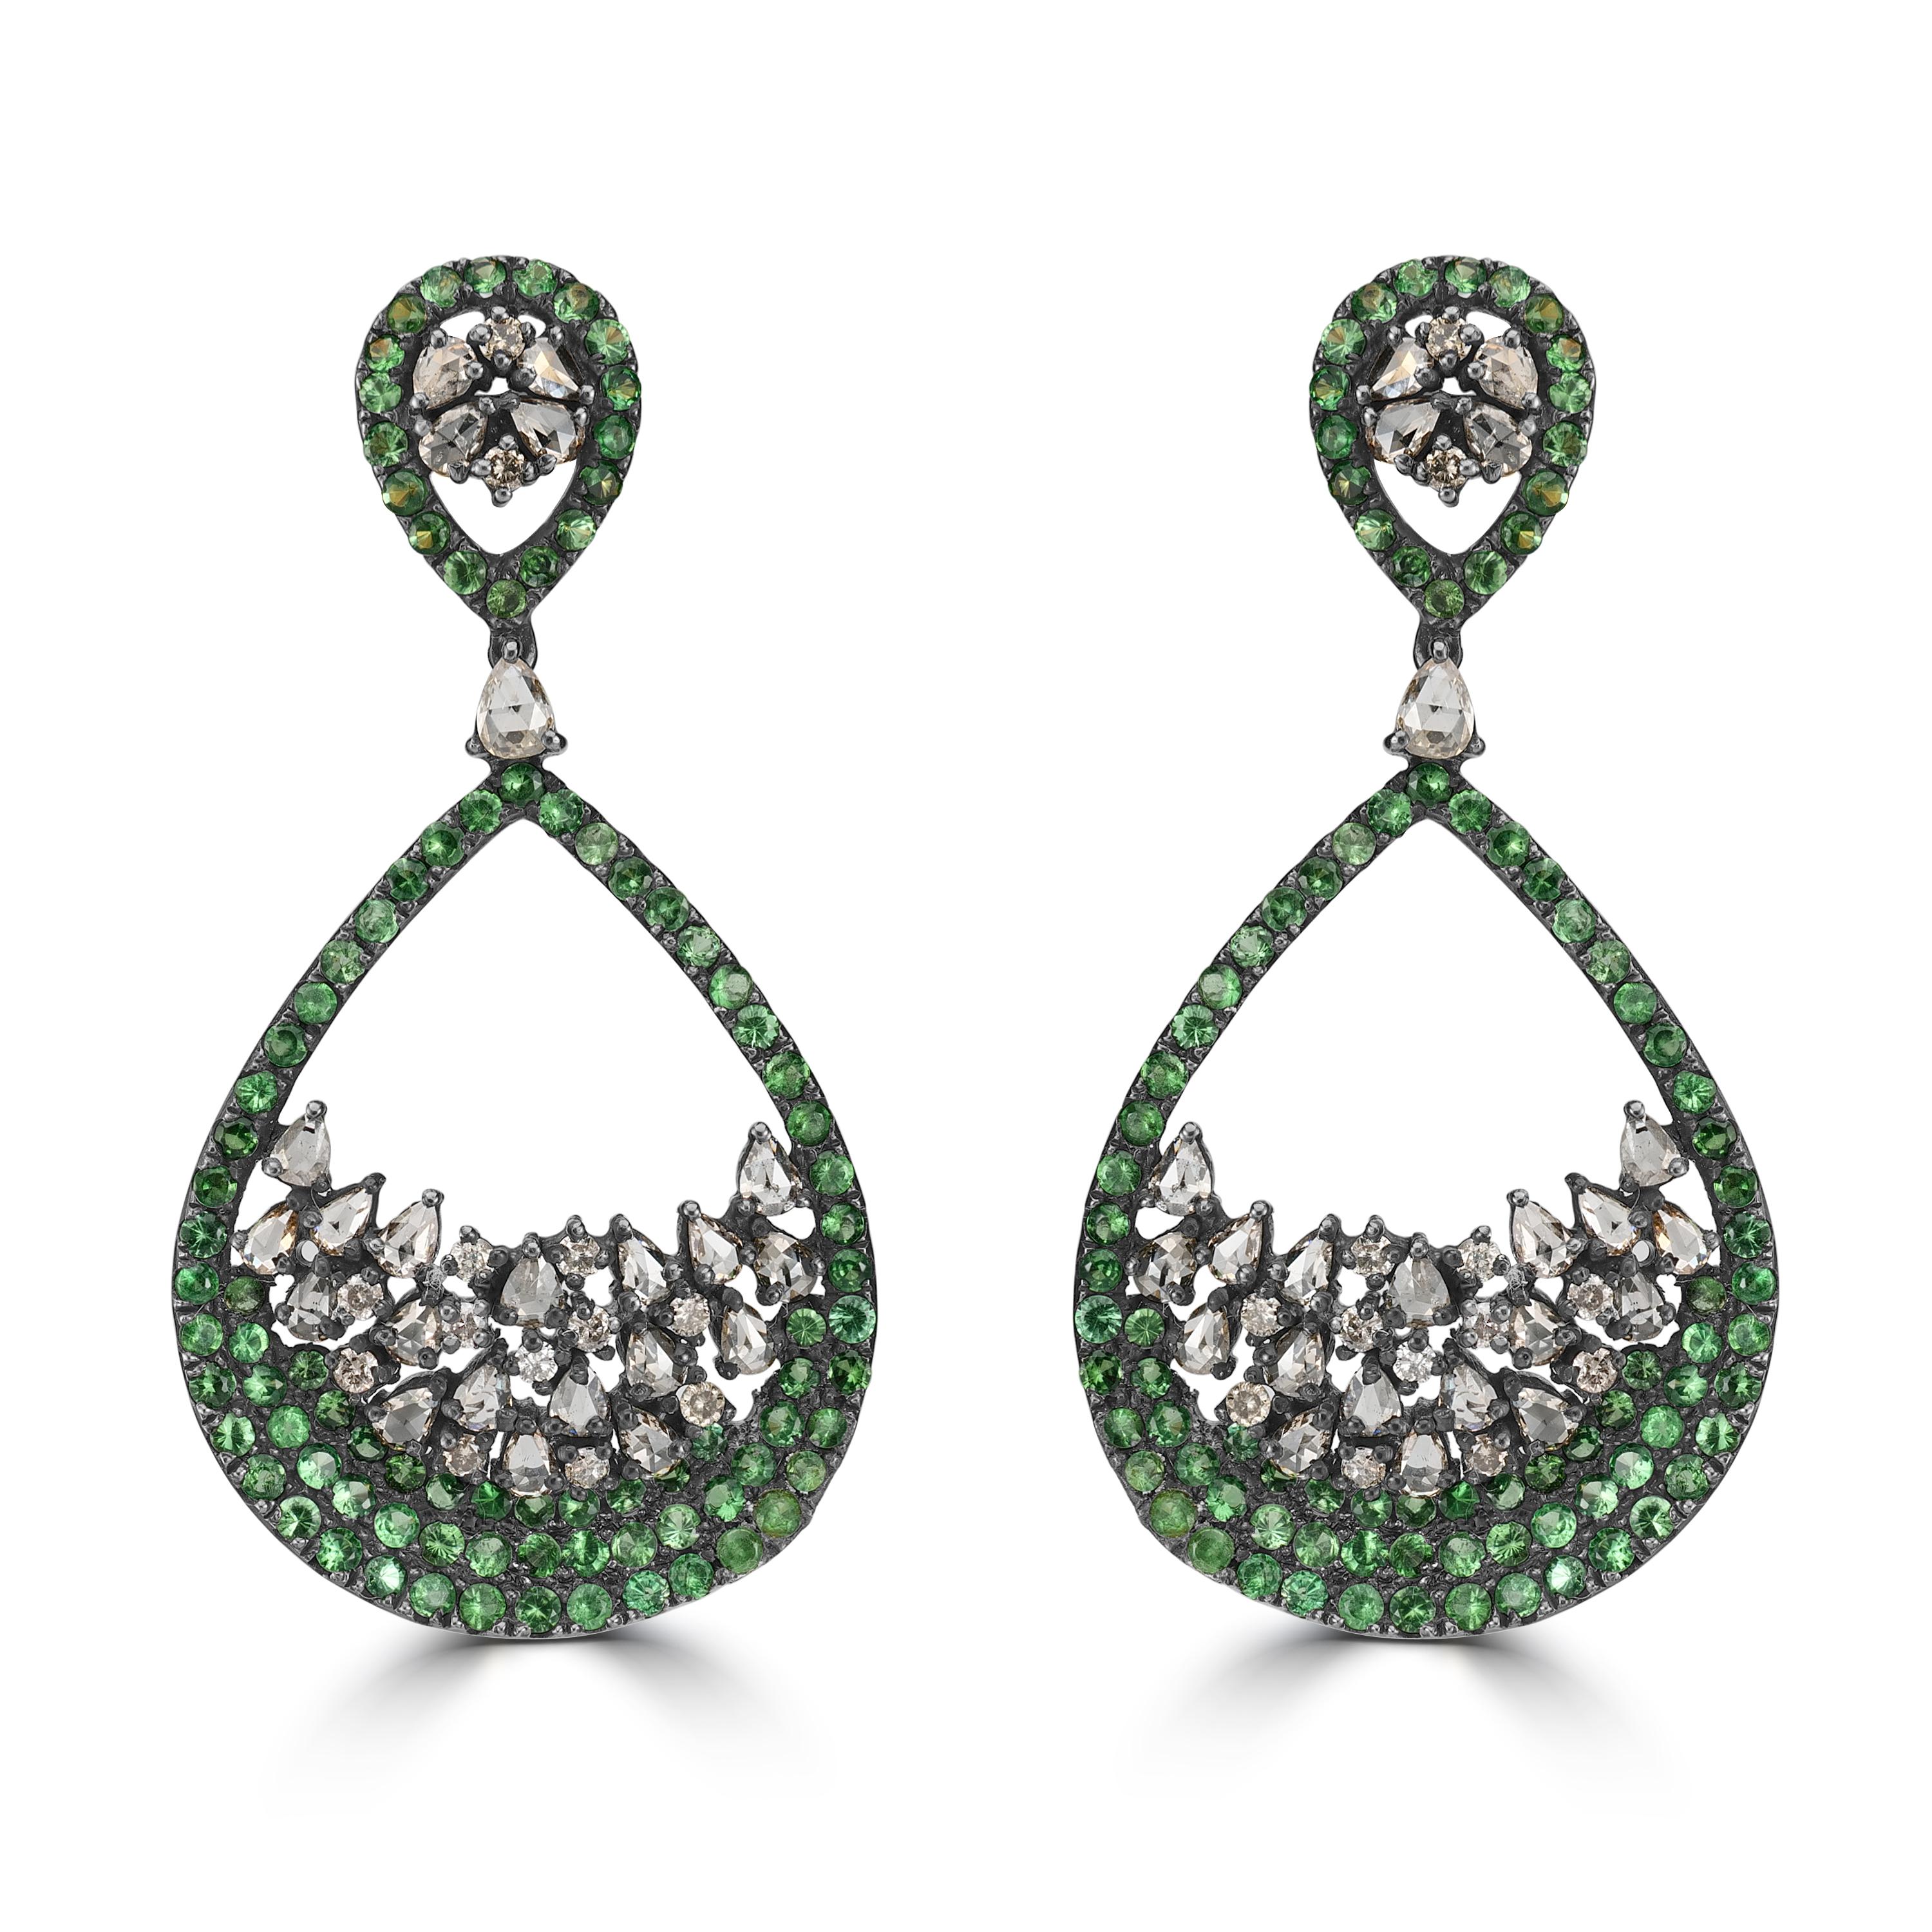 Victorian 6 Cttw. Tsavorite and Diamond In Tear Drop Earrings in 18k/925 In New Condition For Sale In New York, NY